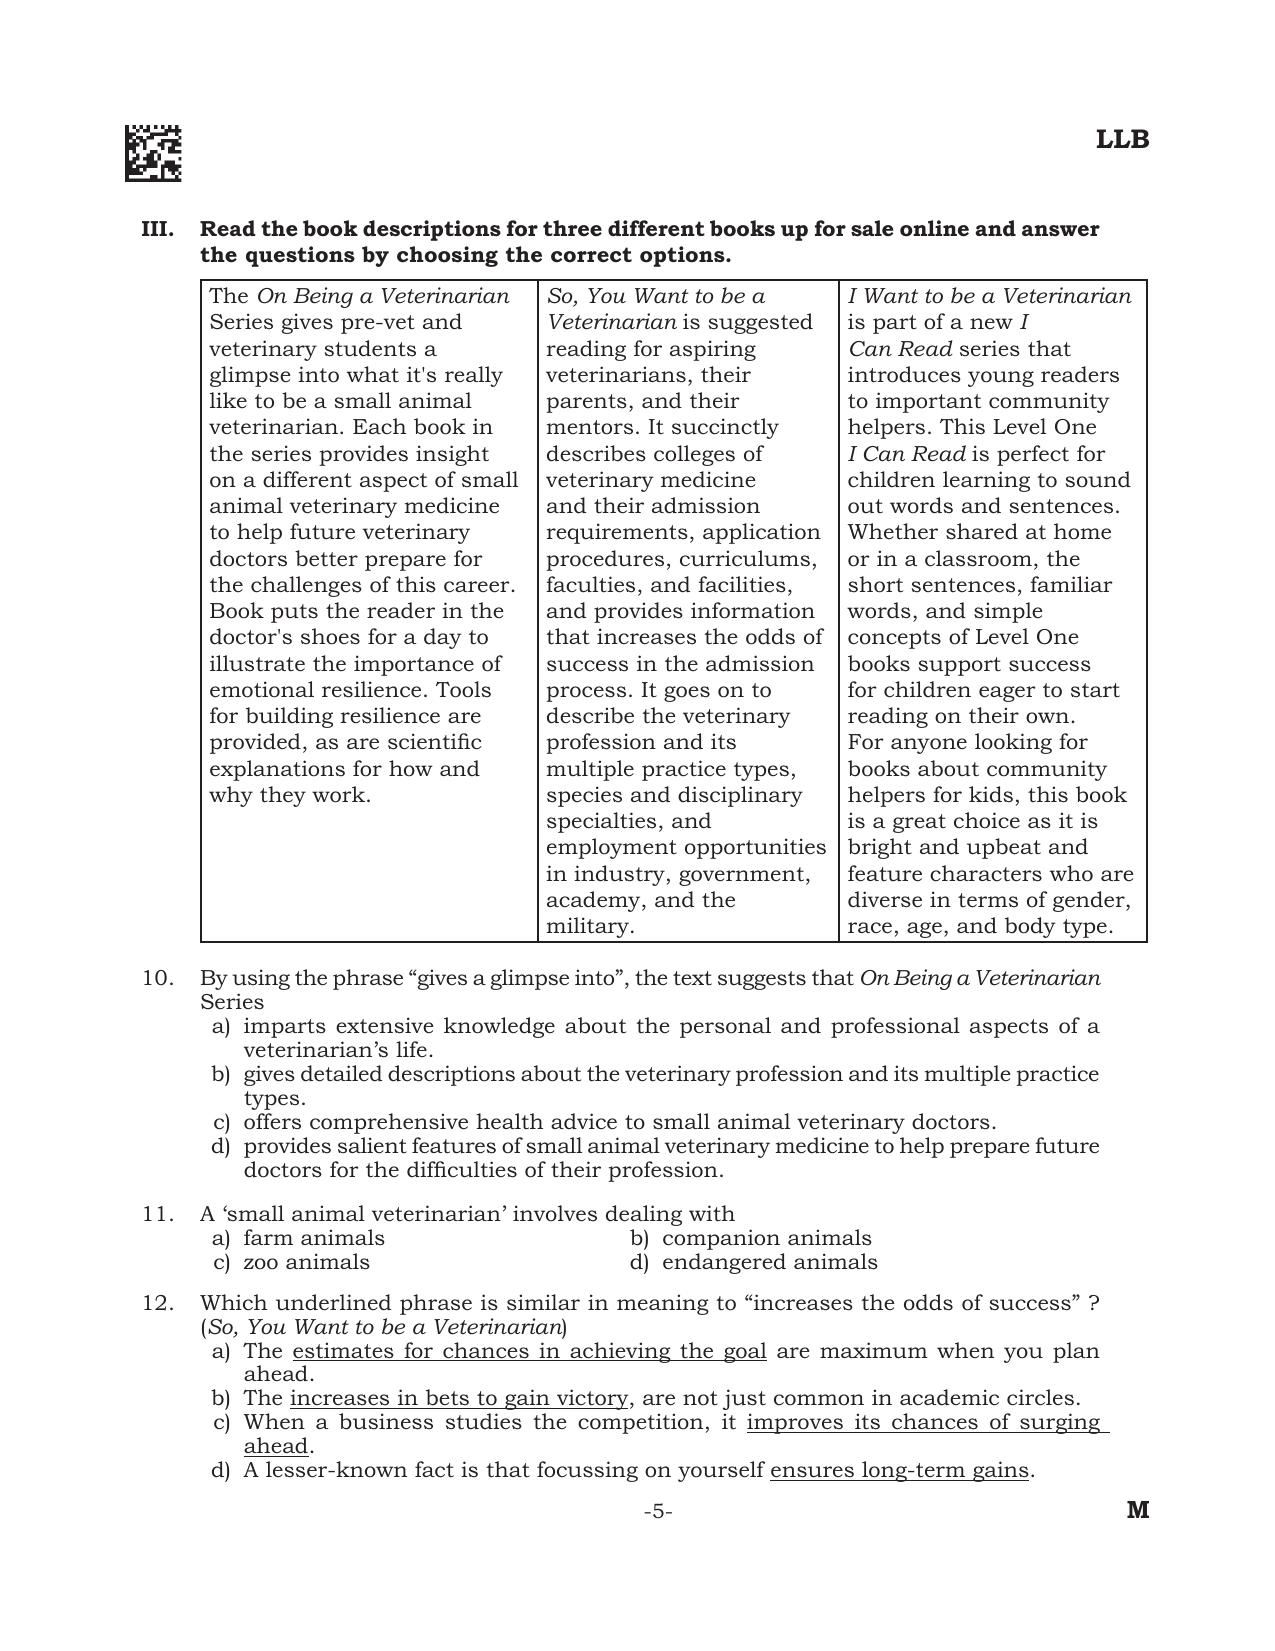 AILET 2022 Question Paper for BA LLB - Page 5